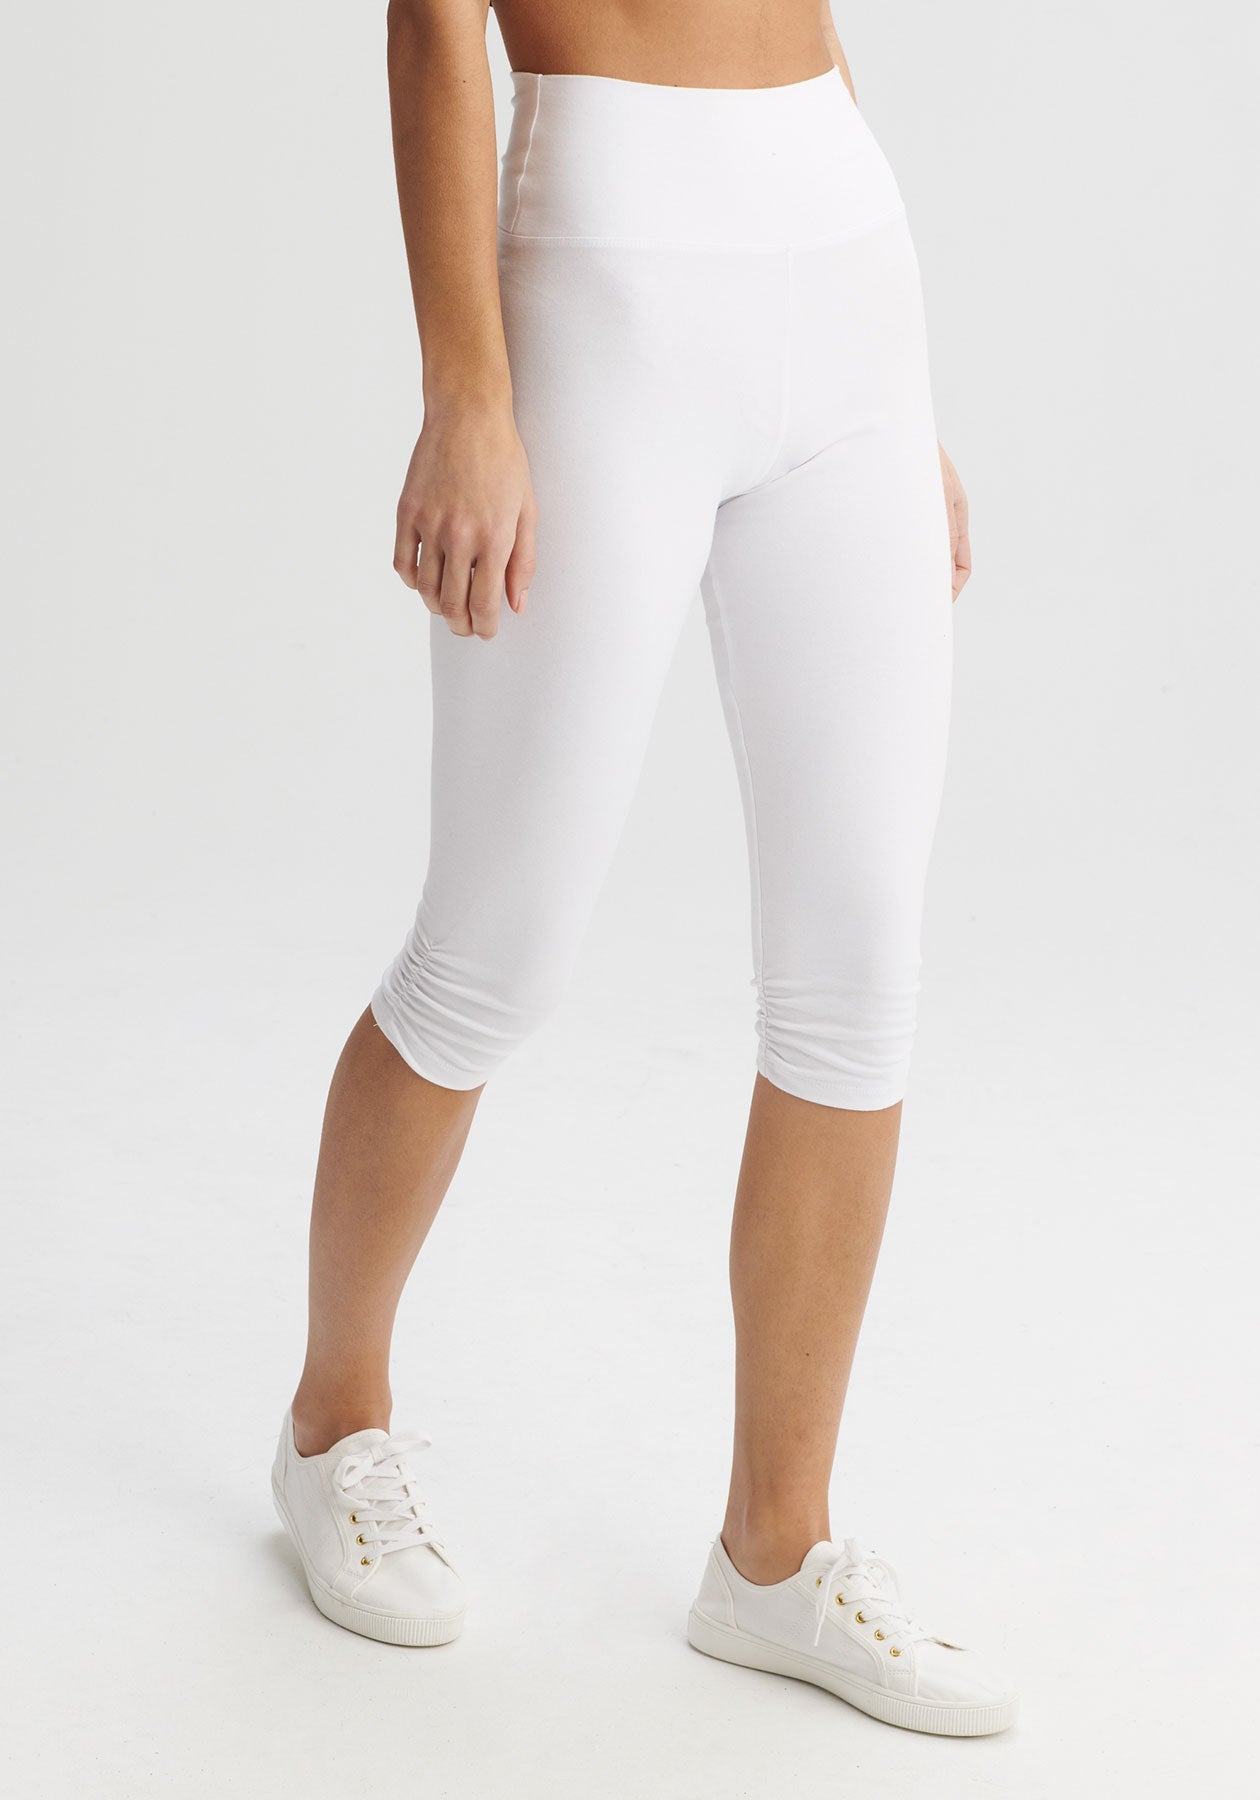 Ladies Cropped White Leggings Uk  International Society of Precision  Agriculture